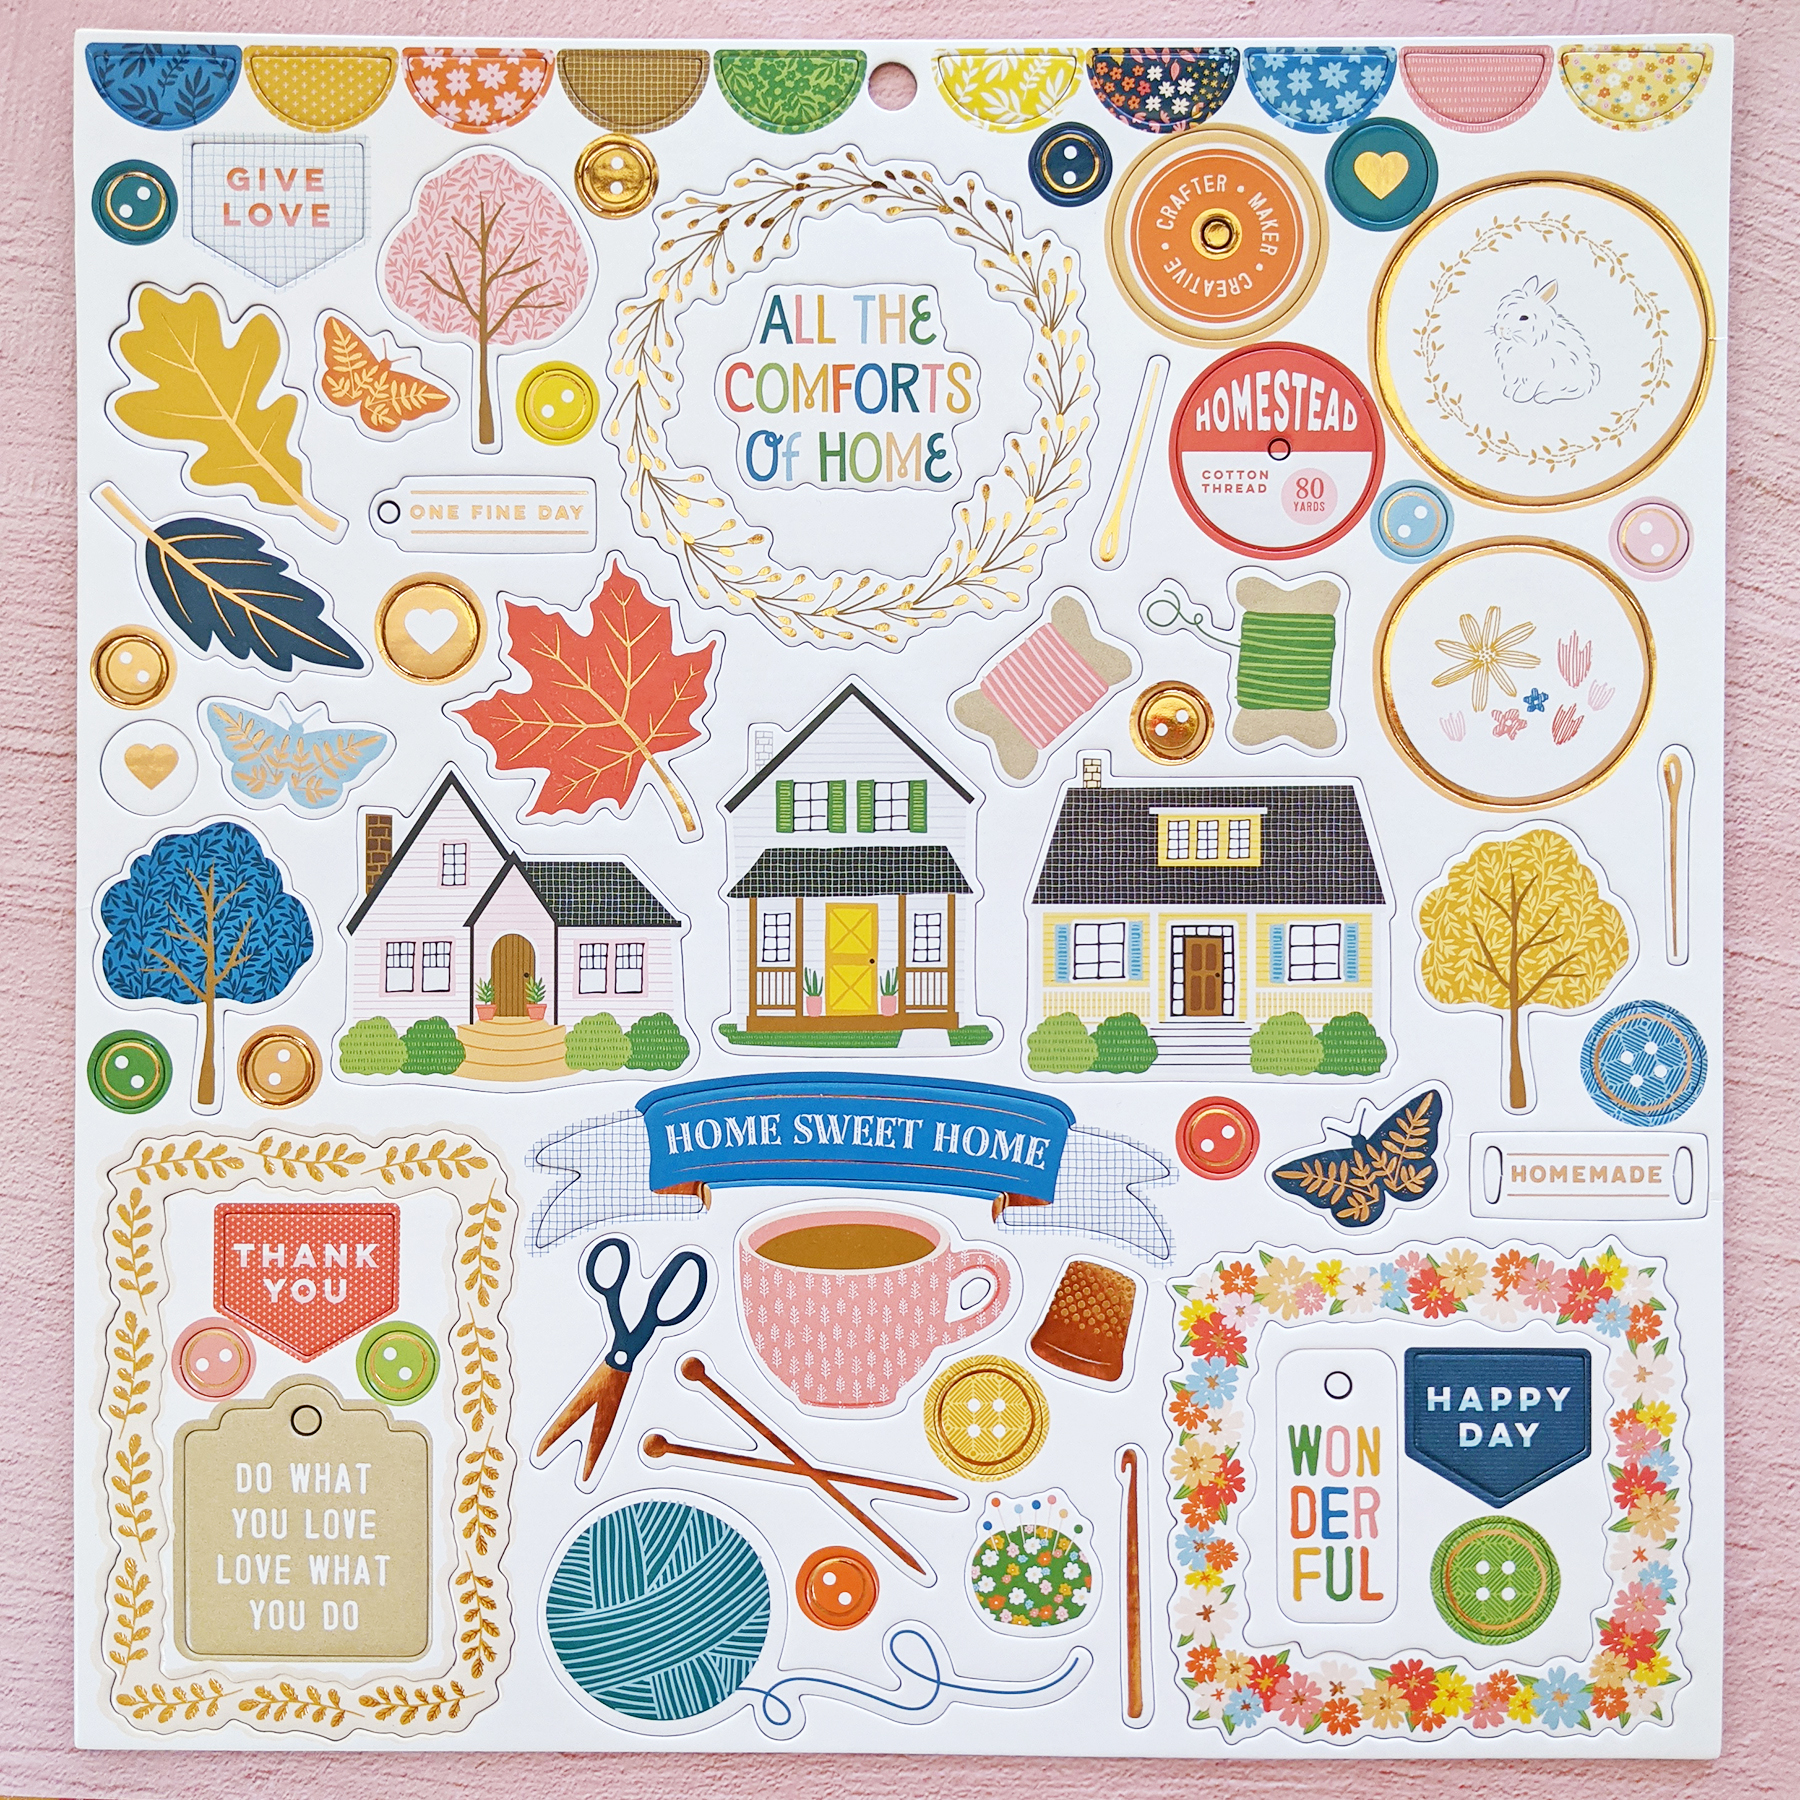 New Paige Evans Collection Bungalow Lane Set Embellishments by American Craft,Crafts Supplies,Sticker,Chipboard 12x12,Sticker Book Foil Fall